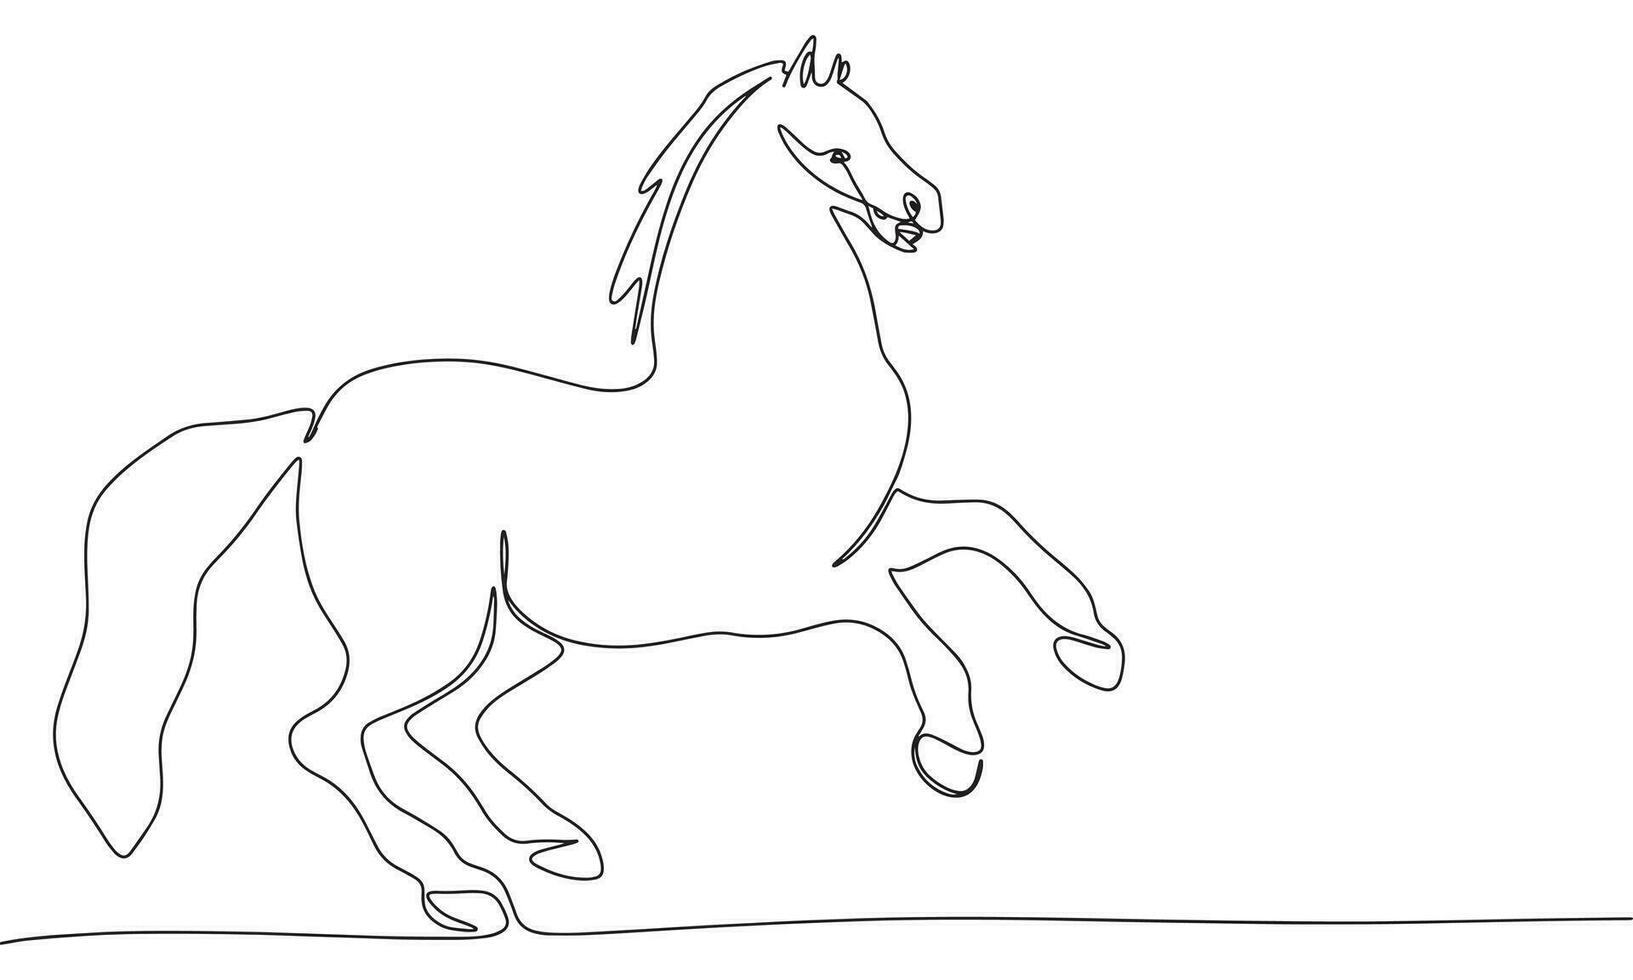 Abstract horse in continuous line art drawing style. Minimalist black linear sketch isolated on white background. Vector illustration